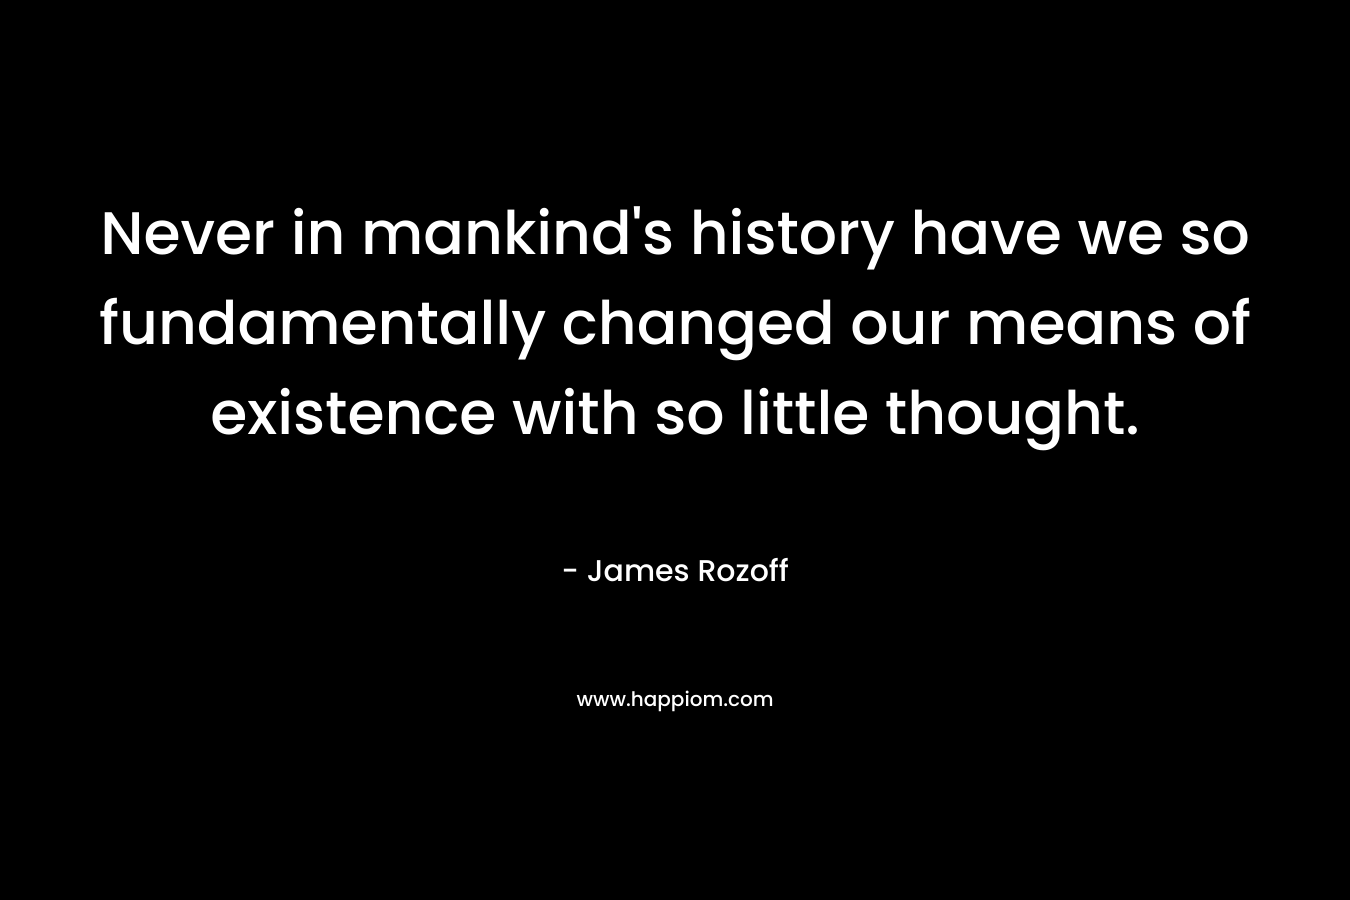 Never in mankind's history have we so fundamentally changed our means of existence with so little thought.